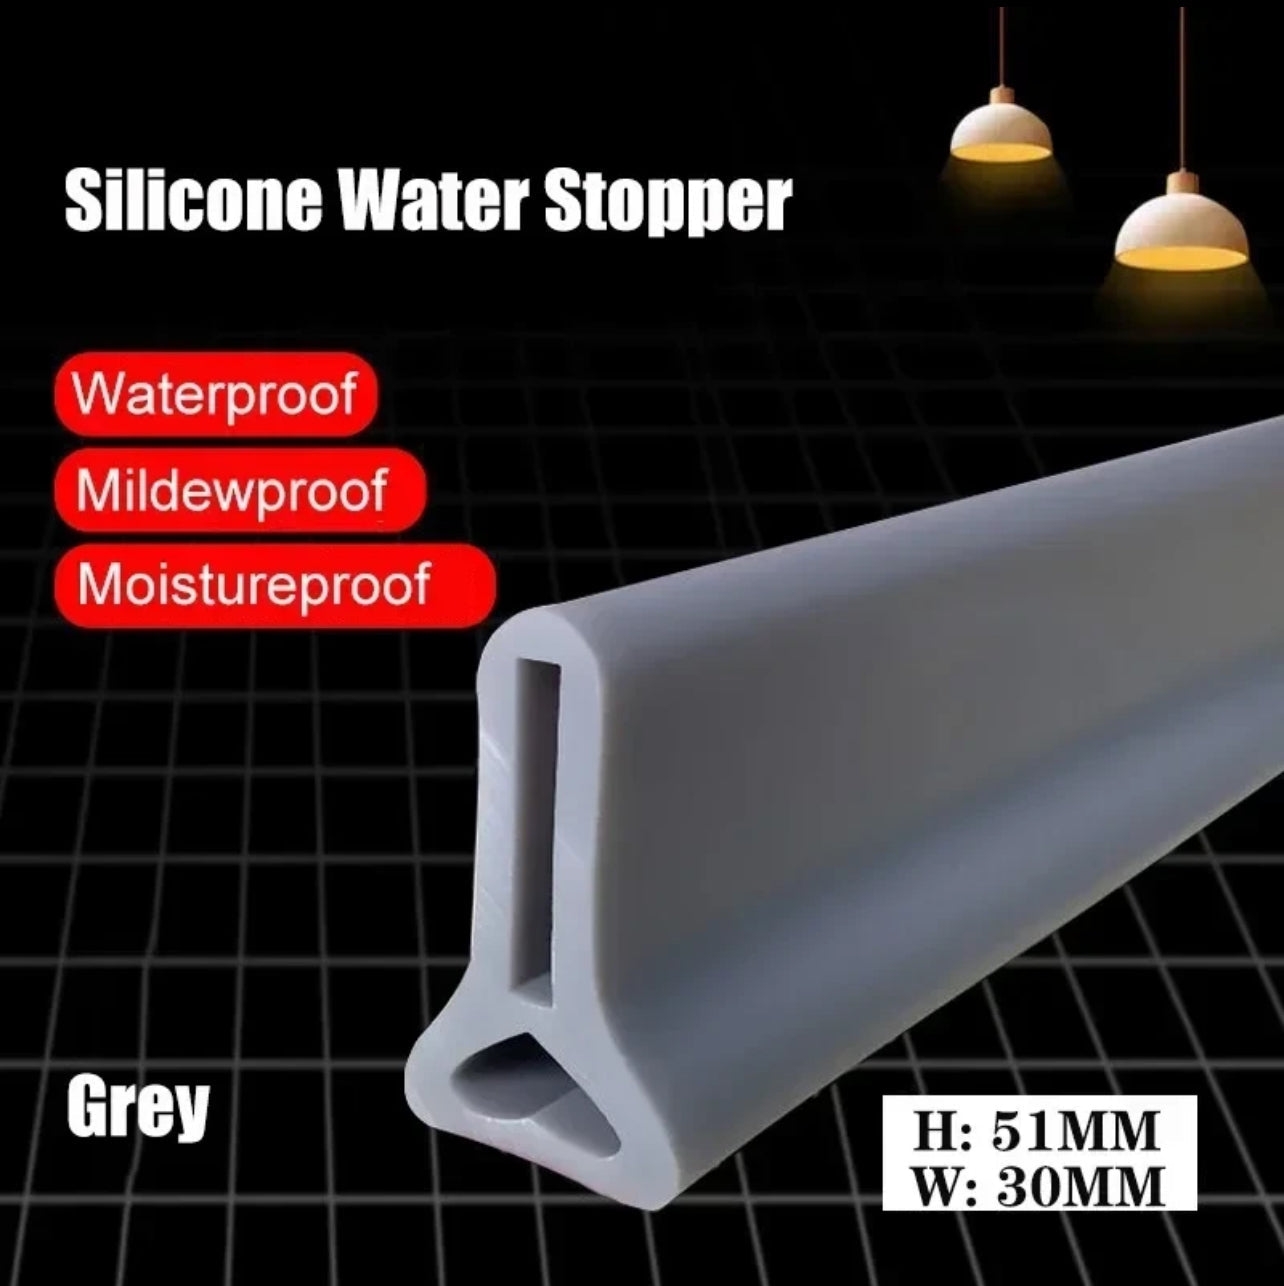 BATHROOM SILICONE WATER STOPPER (60% OFF TODAY!)